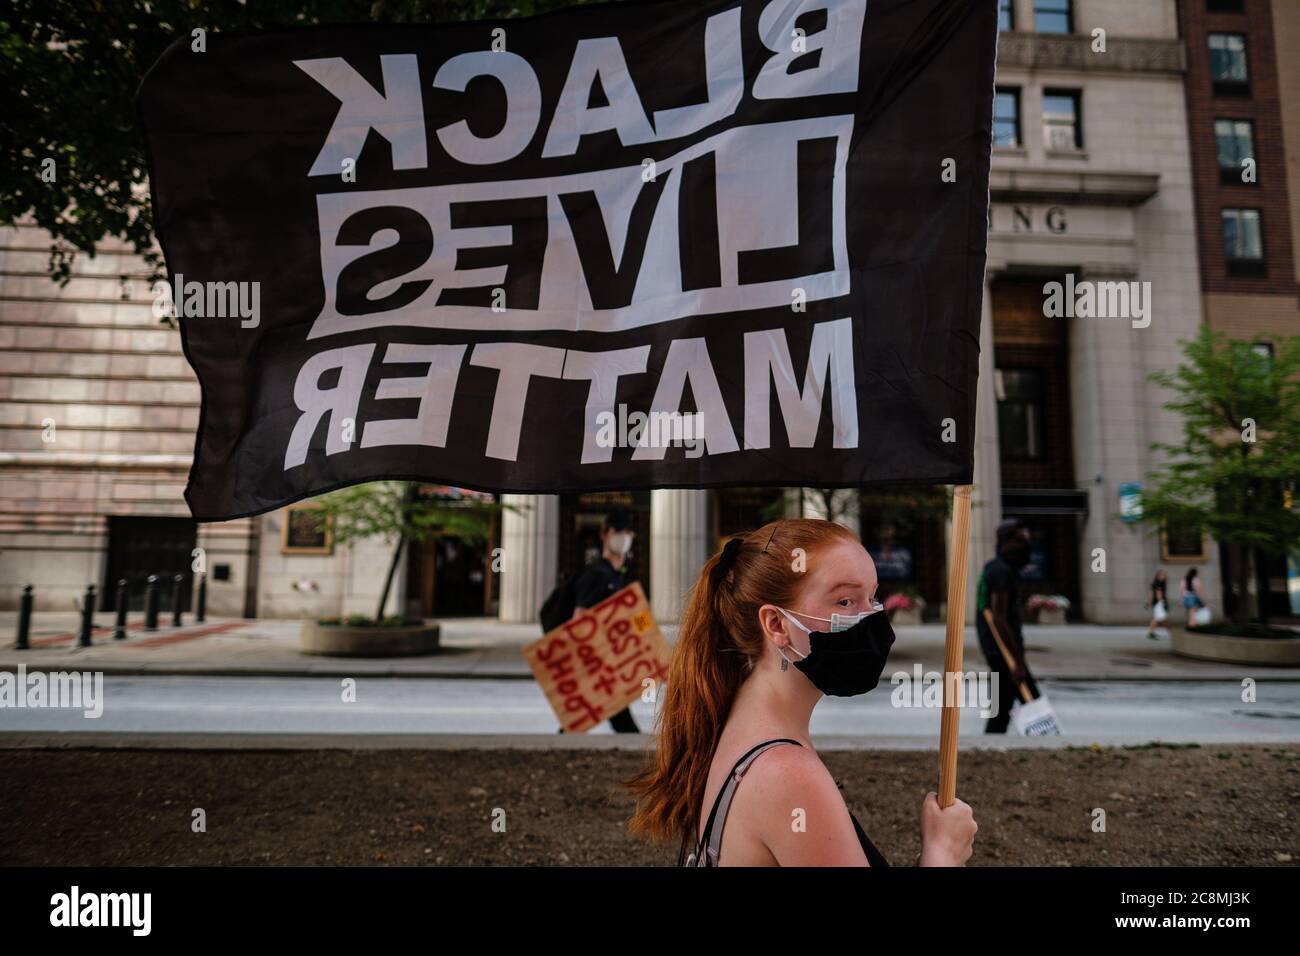 Cleveland, Ohio, USA. 25th July, 2020. Protestors are seen marching through city streets during a ''No Facist Military War On The People'' protest, Saturday, July 25, 2020 in Cleveland, Ohio. Credit: Andrew Dolph/ZUMA Wire/Alamy Live News Stock Photo